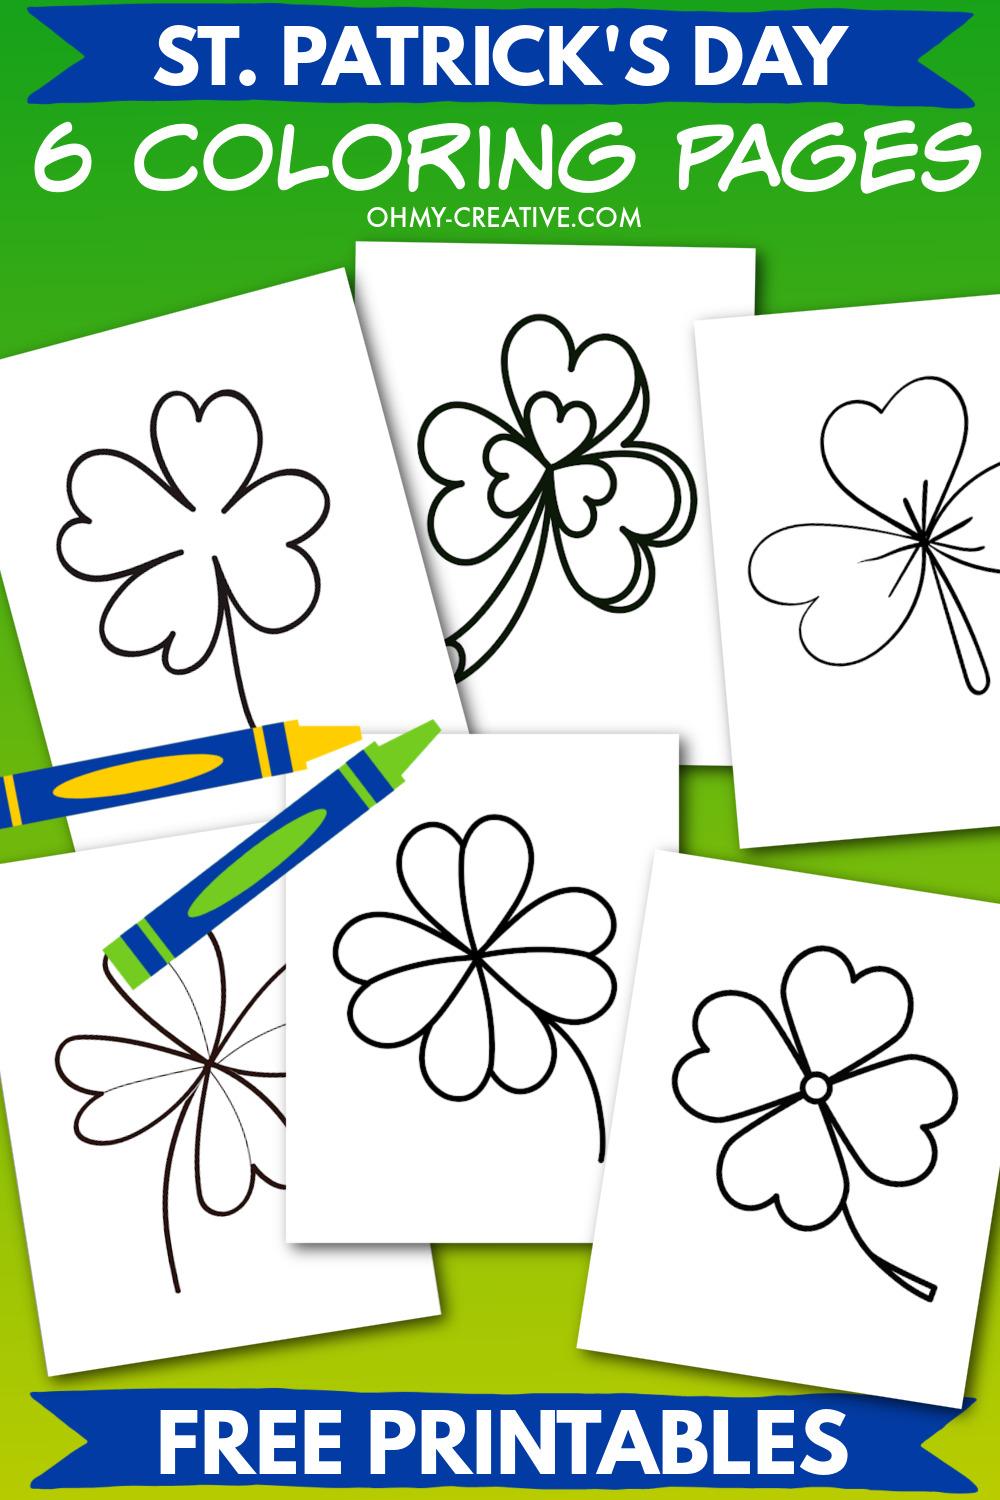 A collage of 6 free printable shamrock templates. Each template is a different style of black line art shamrock.